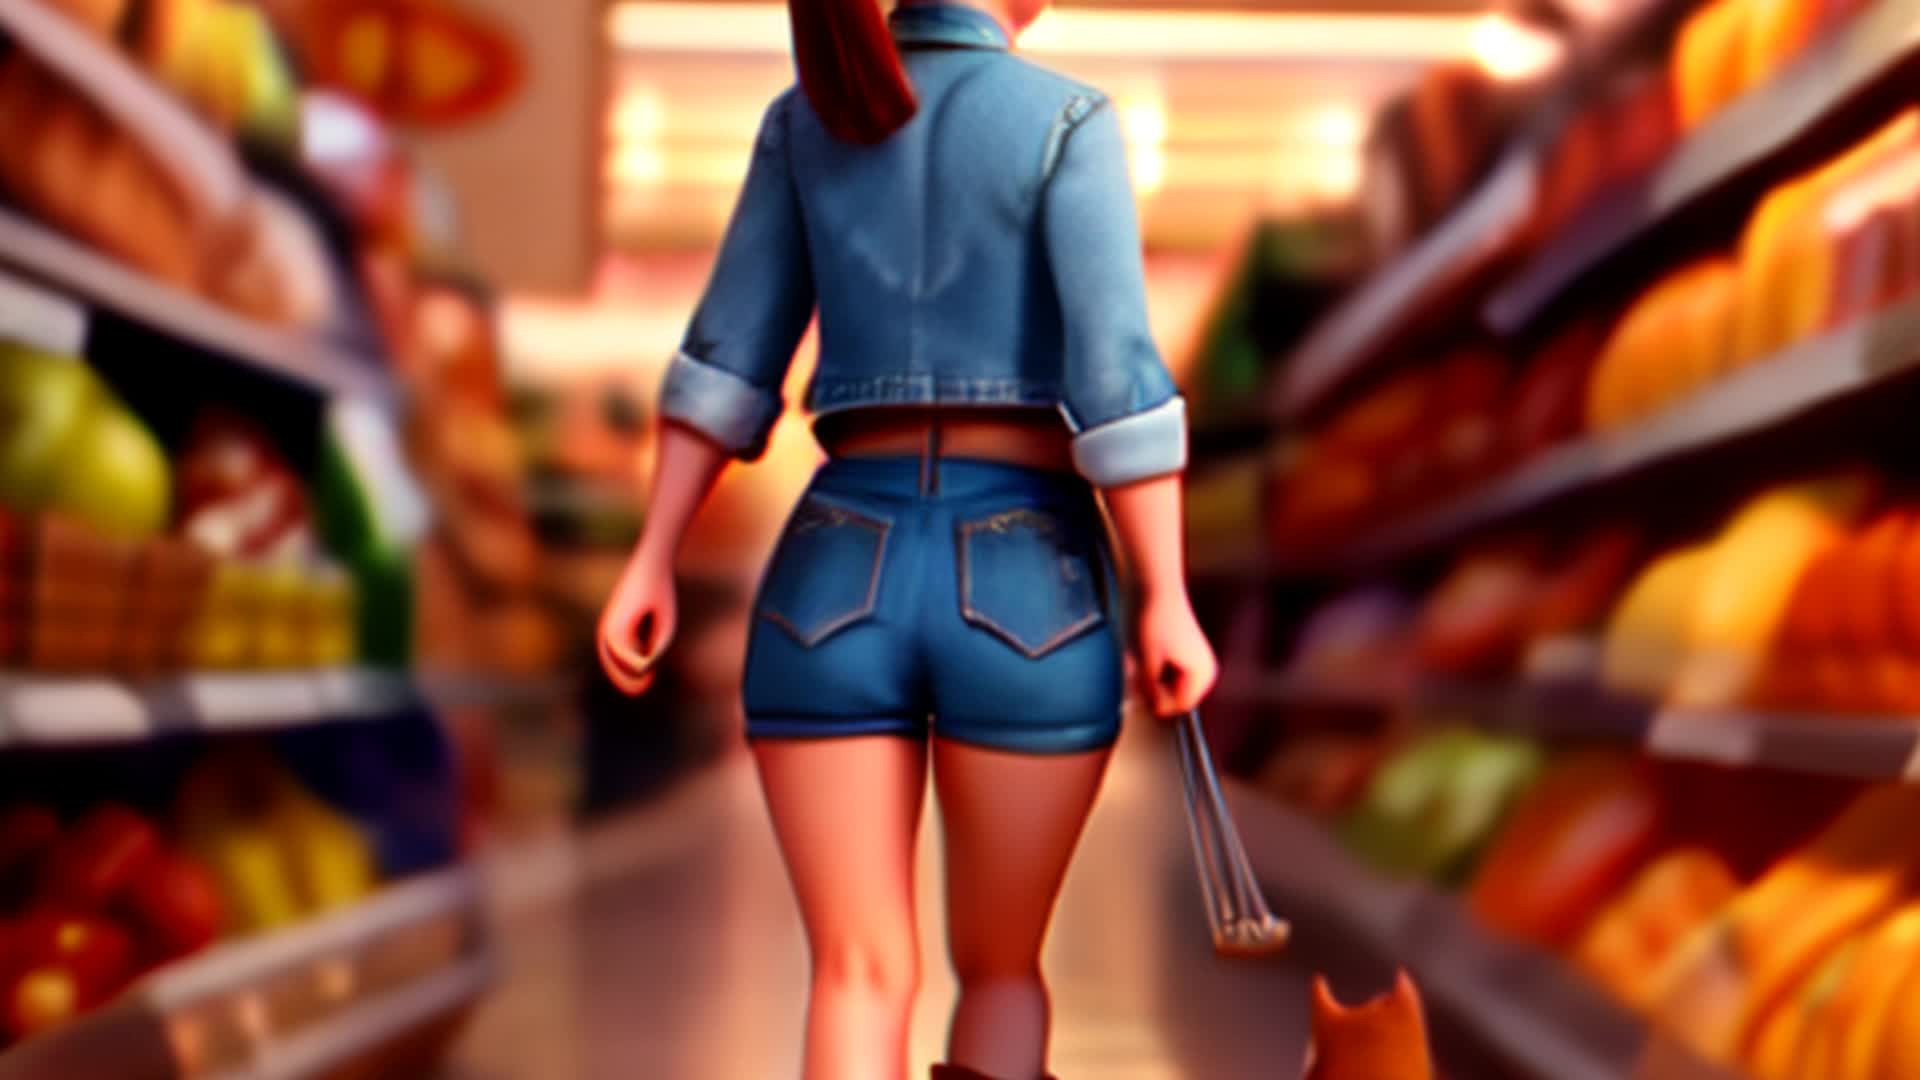 Woman in denim shorts, thigh-high boots, sly smile, taking man's hand in grocery aisle, blurred background, romantic mood, ambient lighting